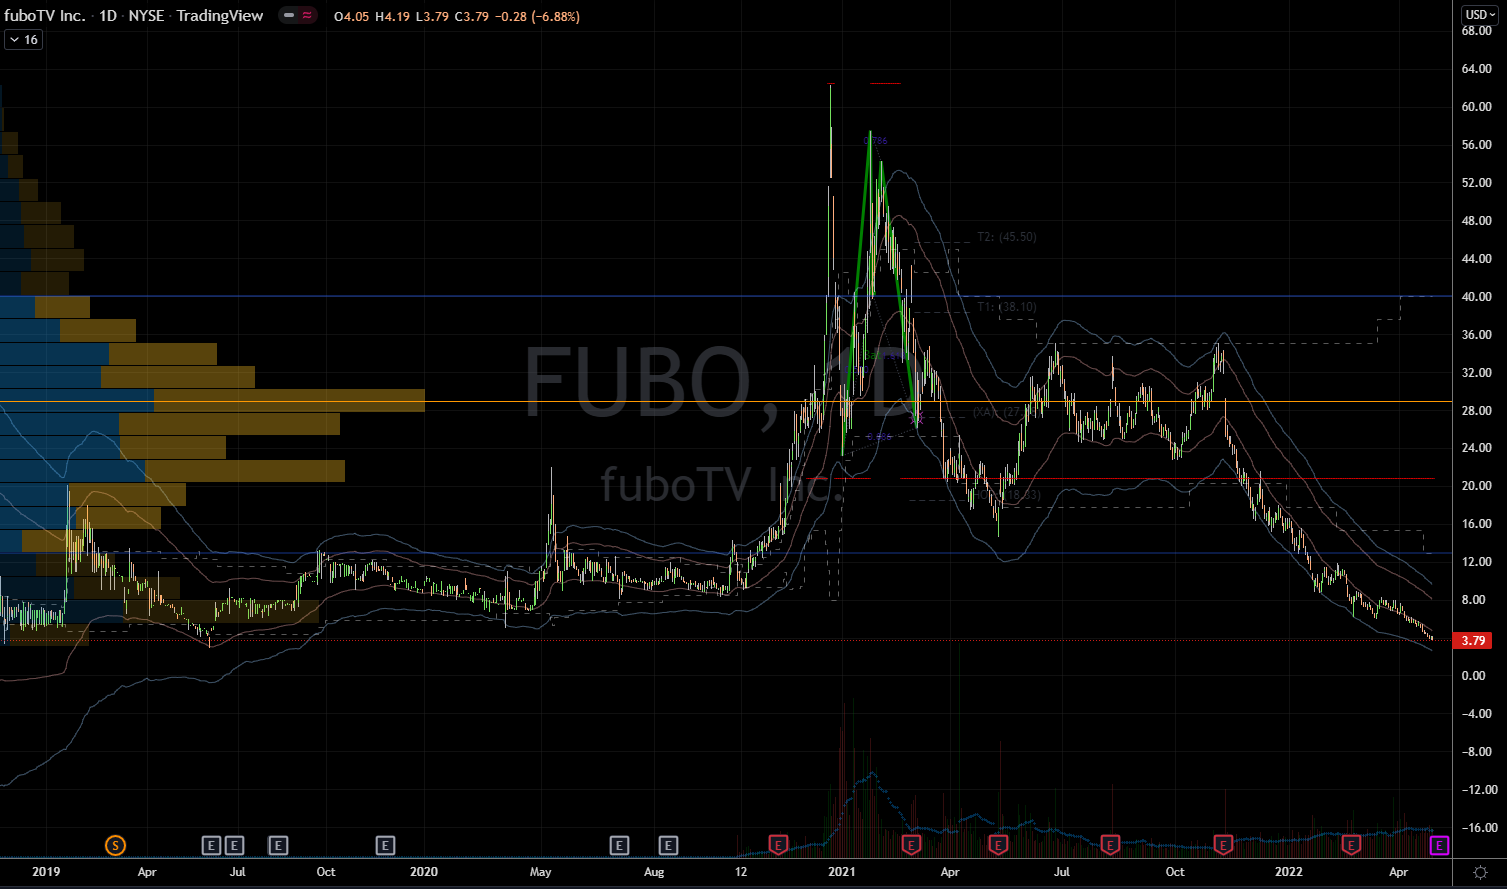 Fubo Stock Chart Showing Extreme Investor Pain